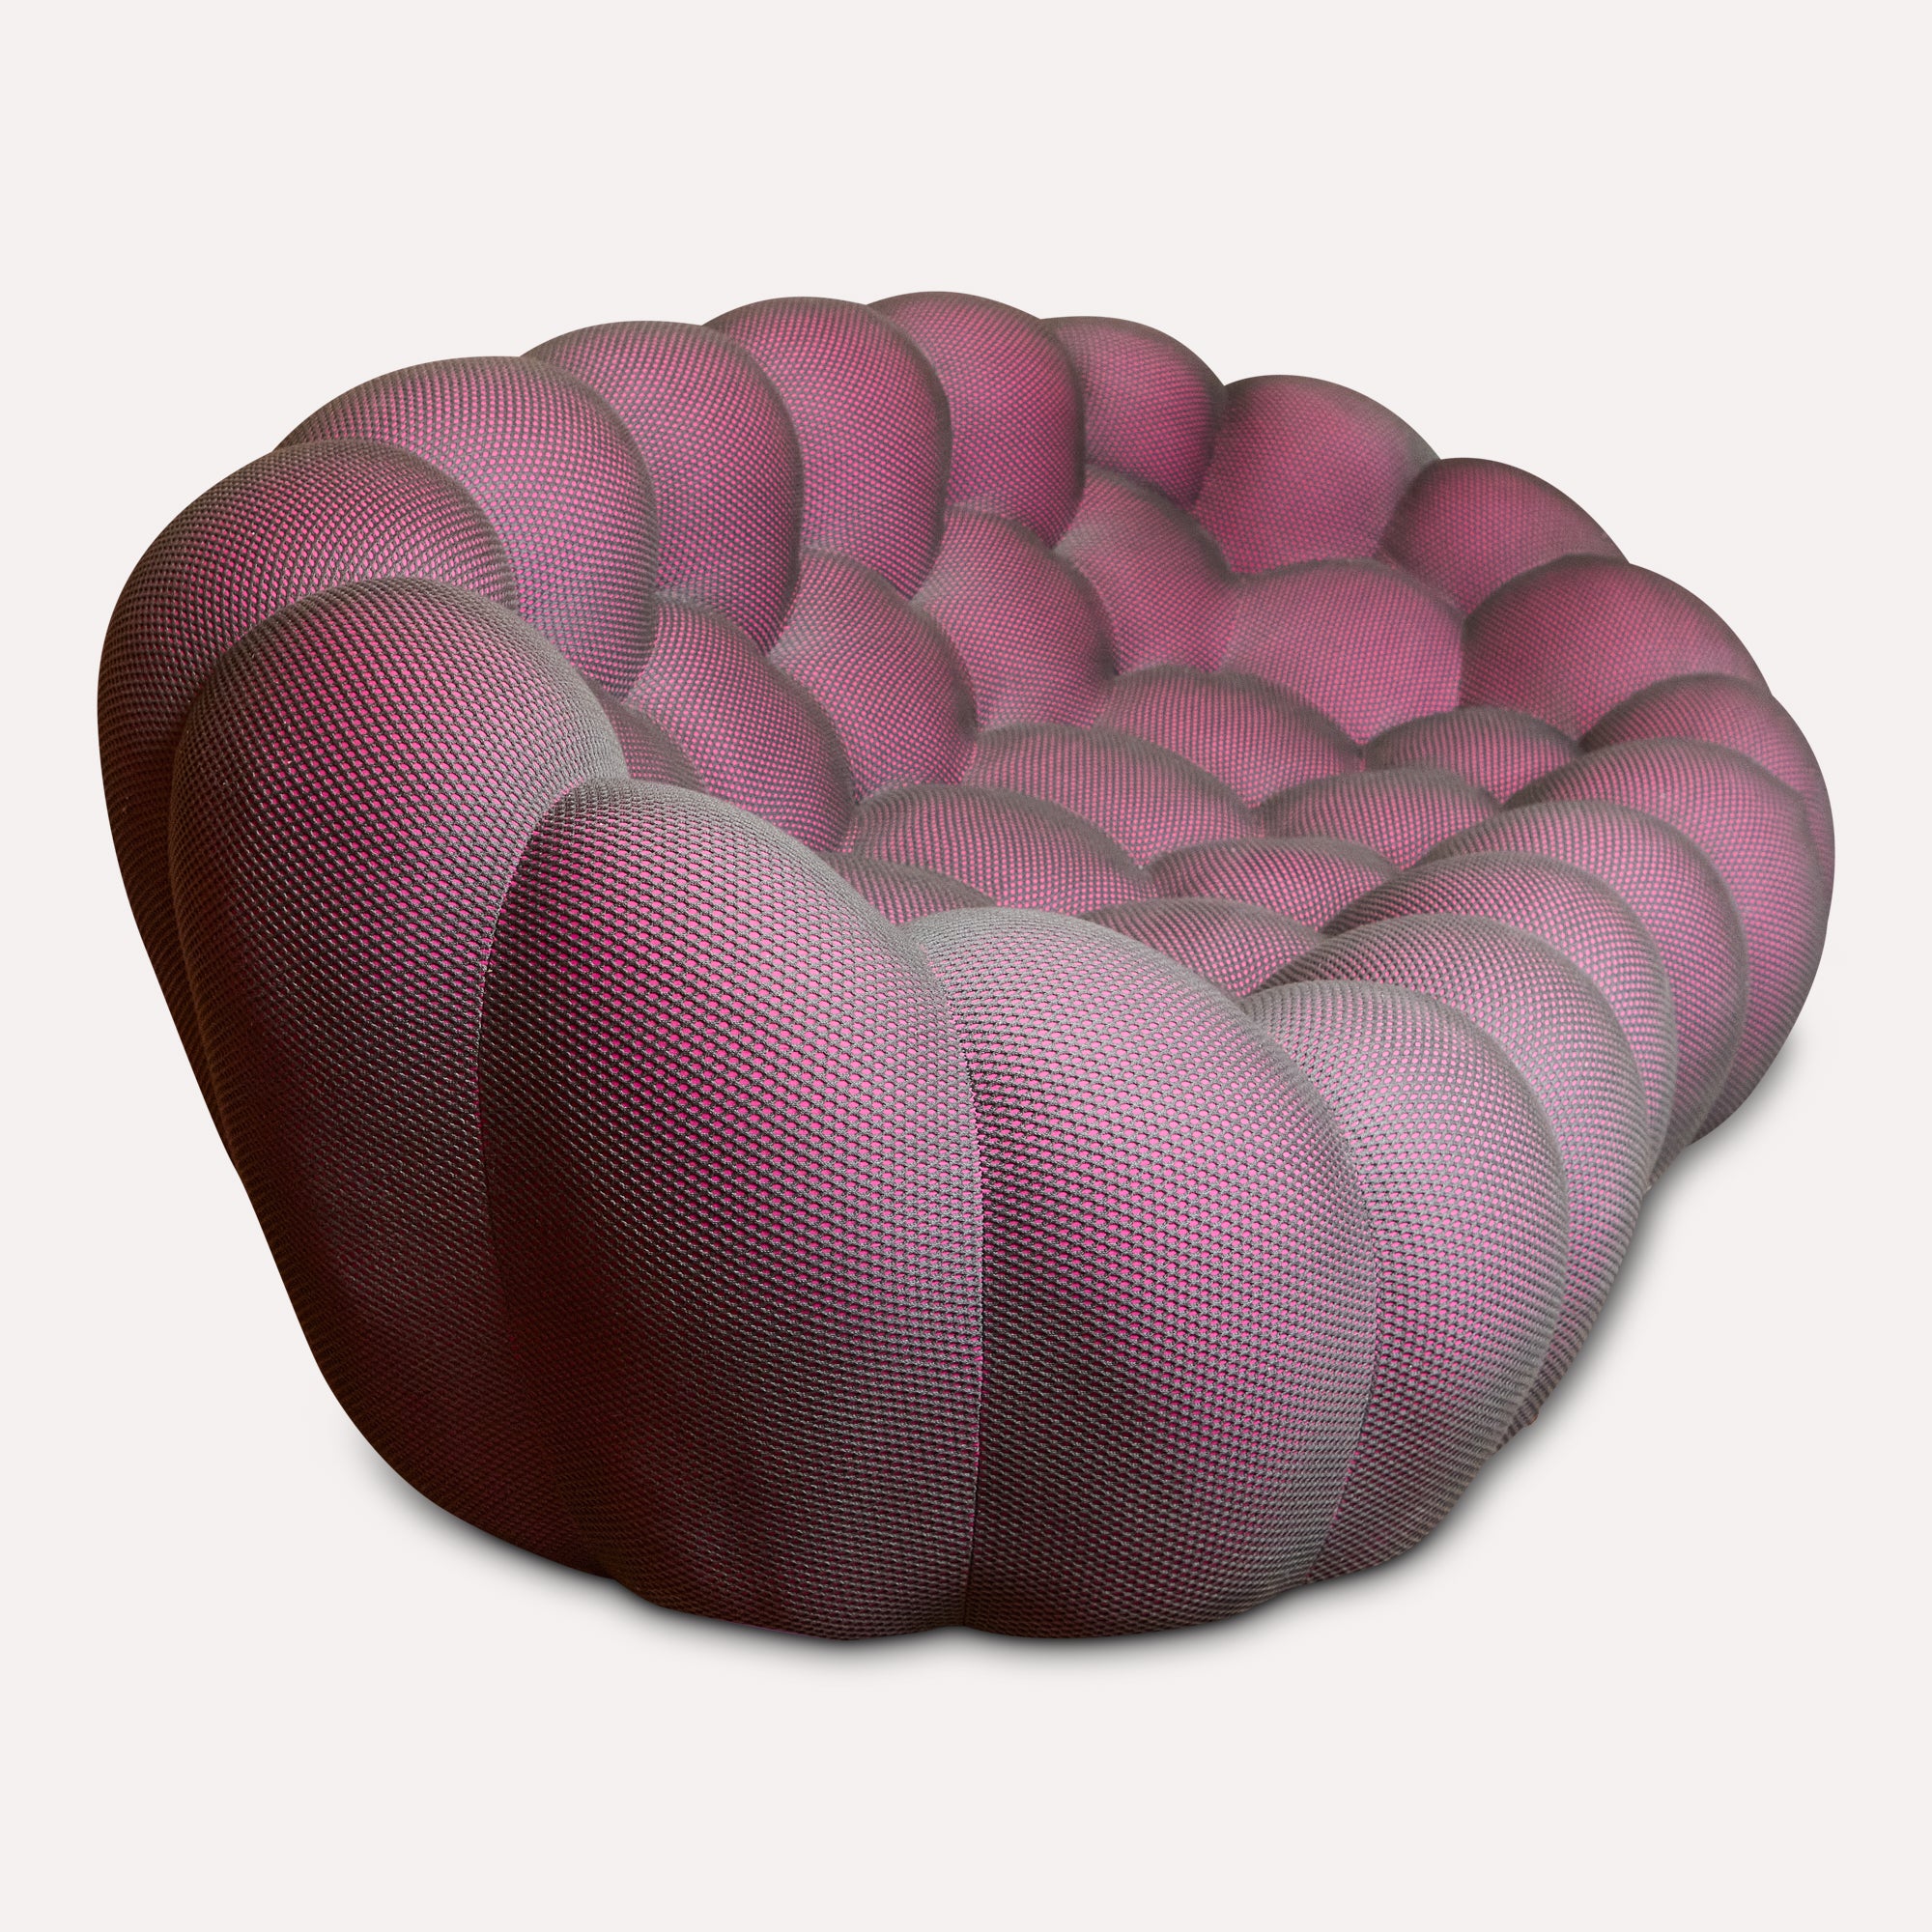 Sofa | In the Bubble style